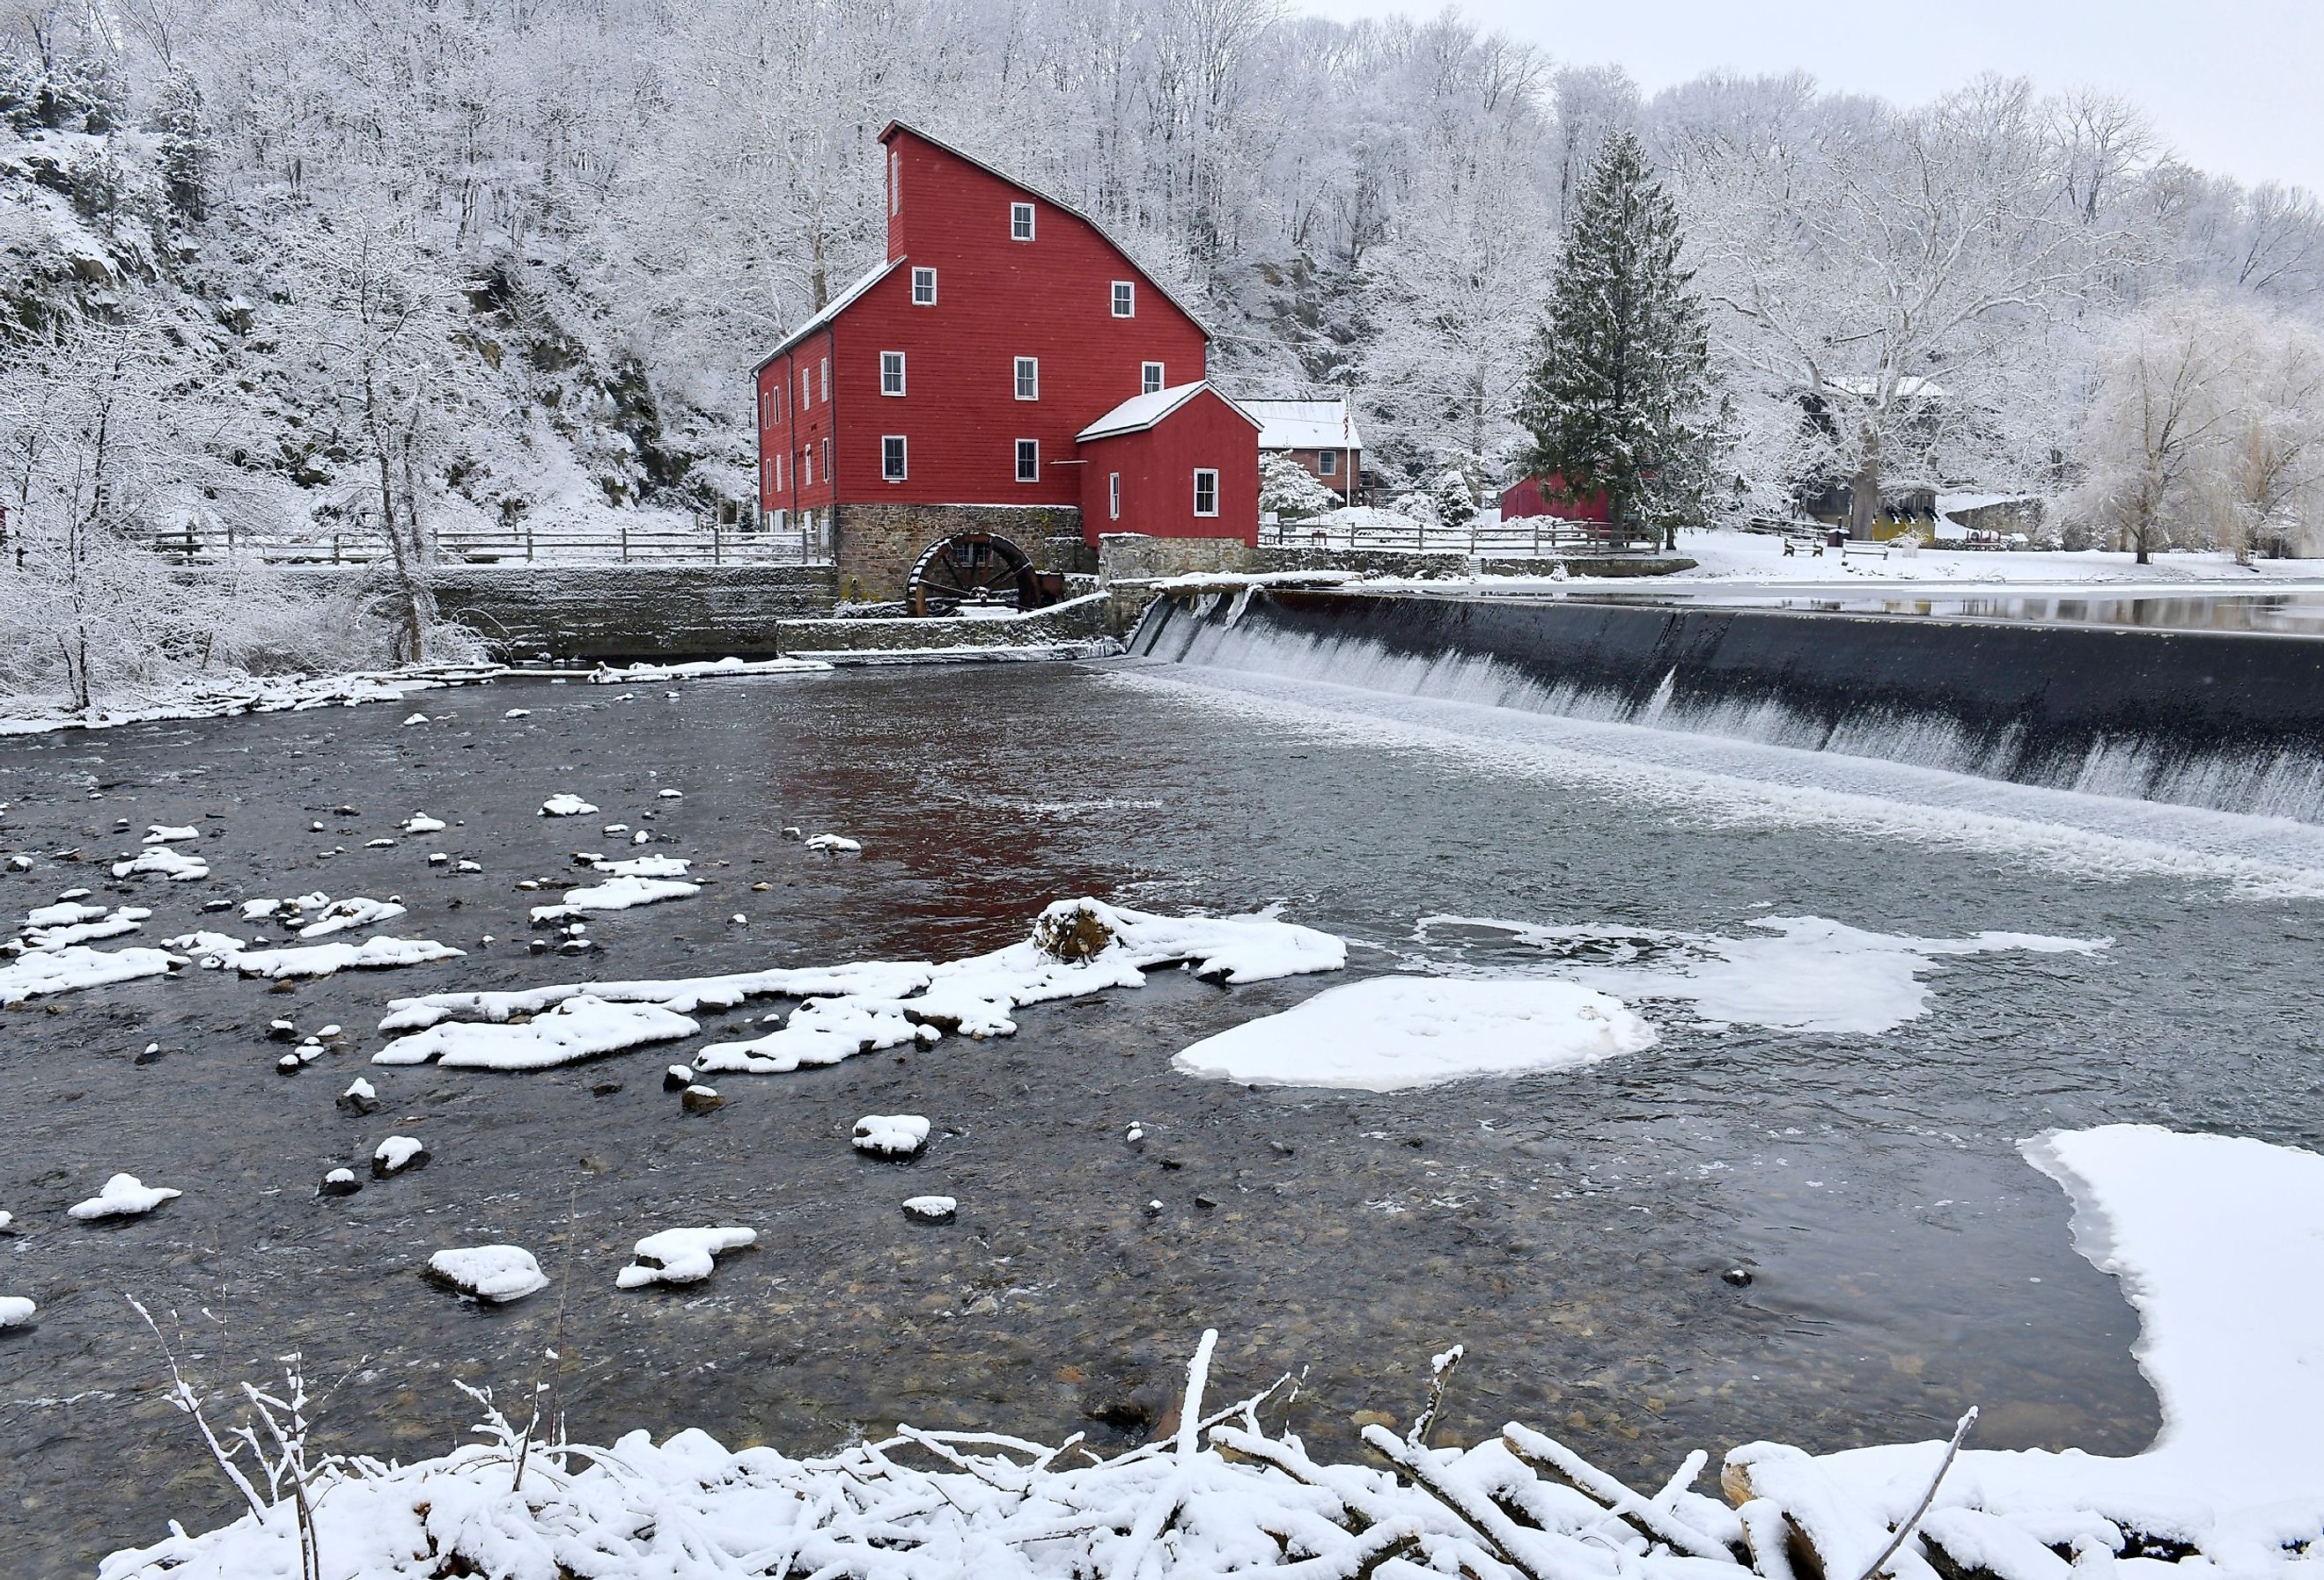 Red Mill in winter, Clinton, New Jersey. Image credit Breck P. Kent via Shutterstock